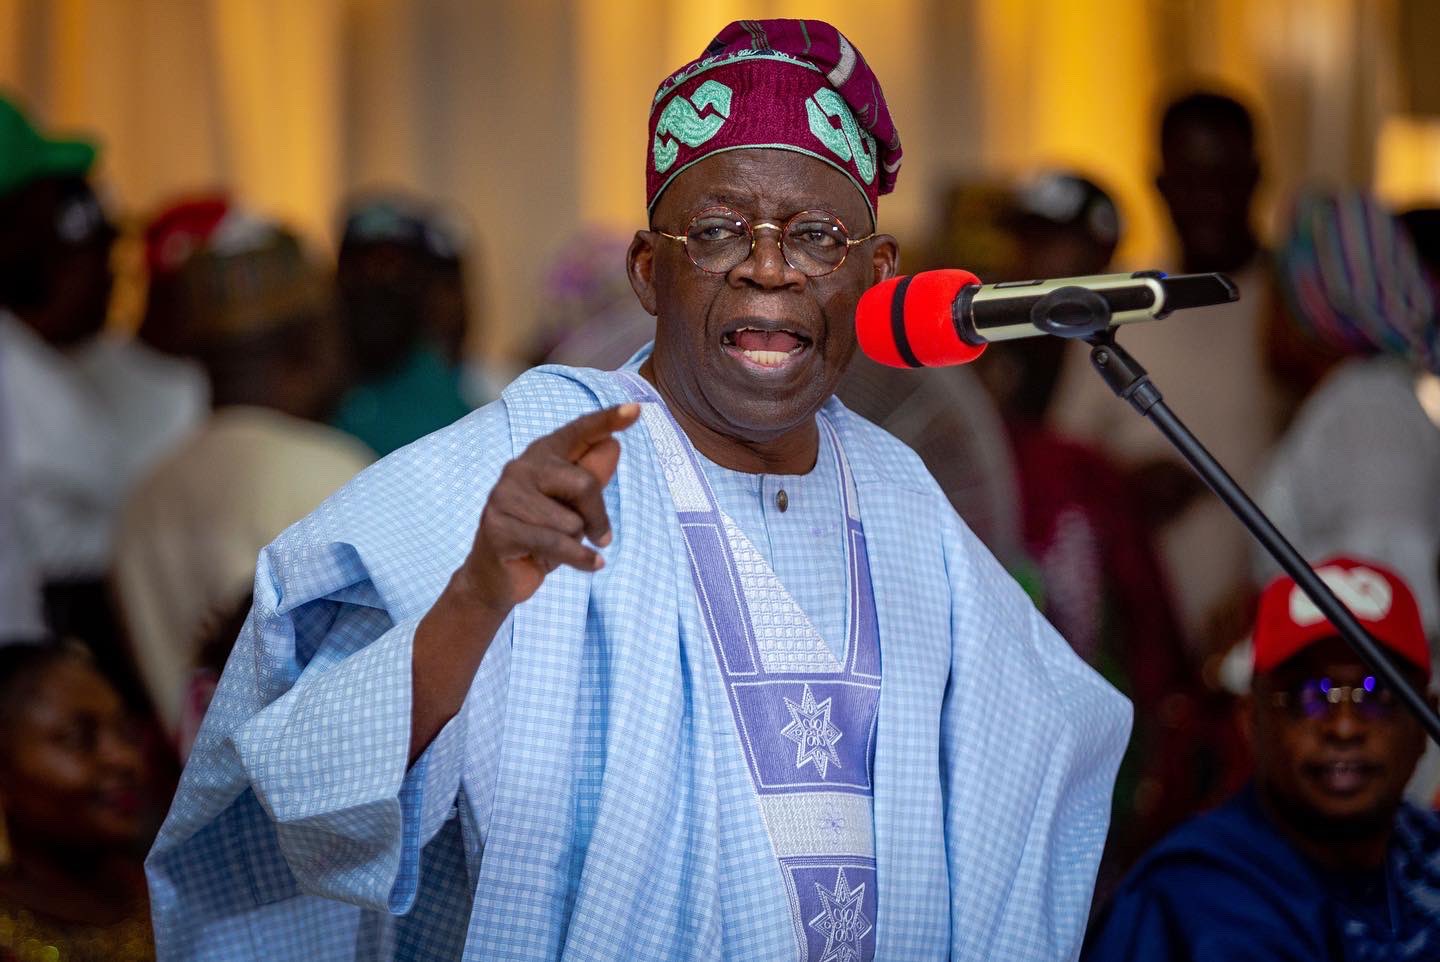 Tinubu Stops FG Officials With No Direct Participation in UNGA From Travelling